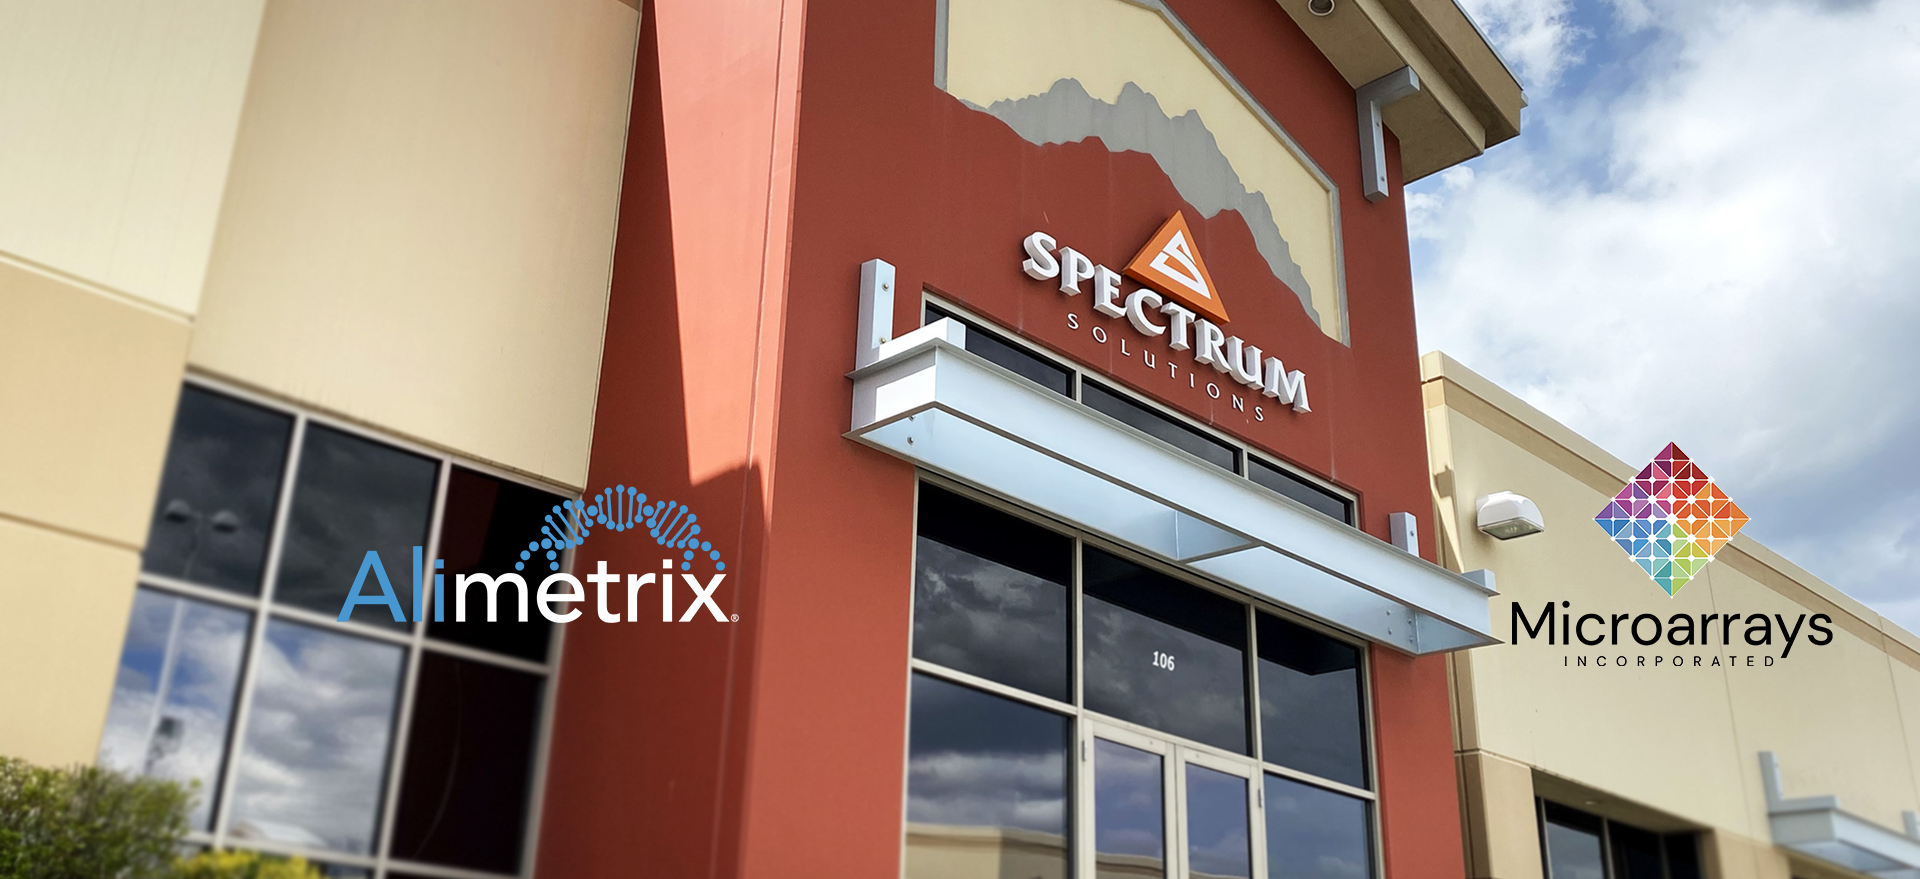 New CEO for SPectrum Solutions-Bill Phillips